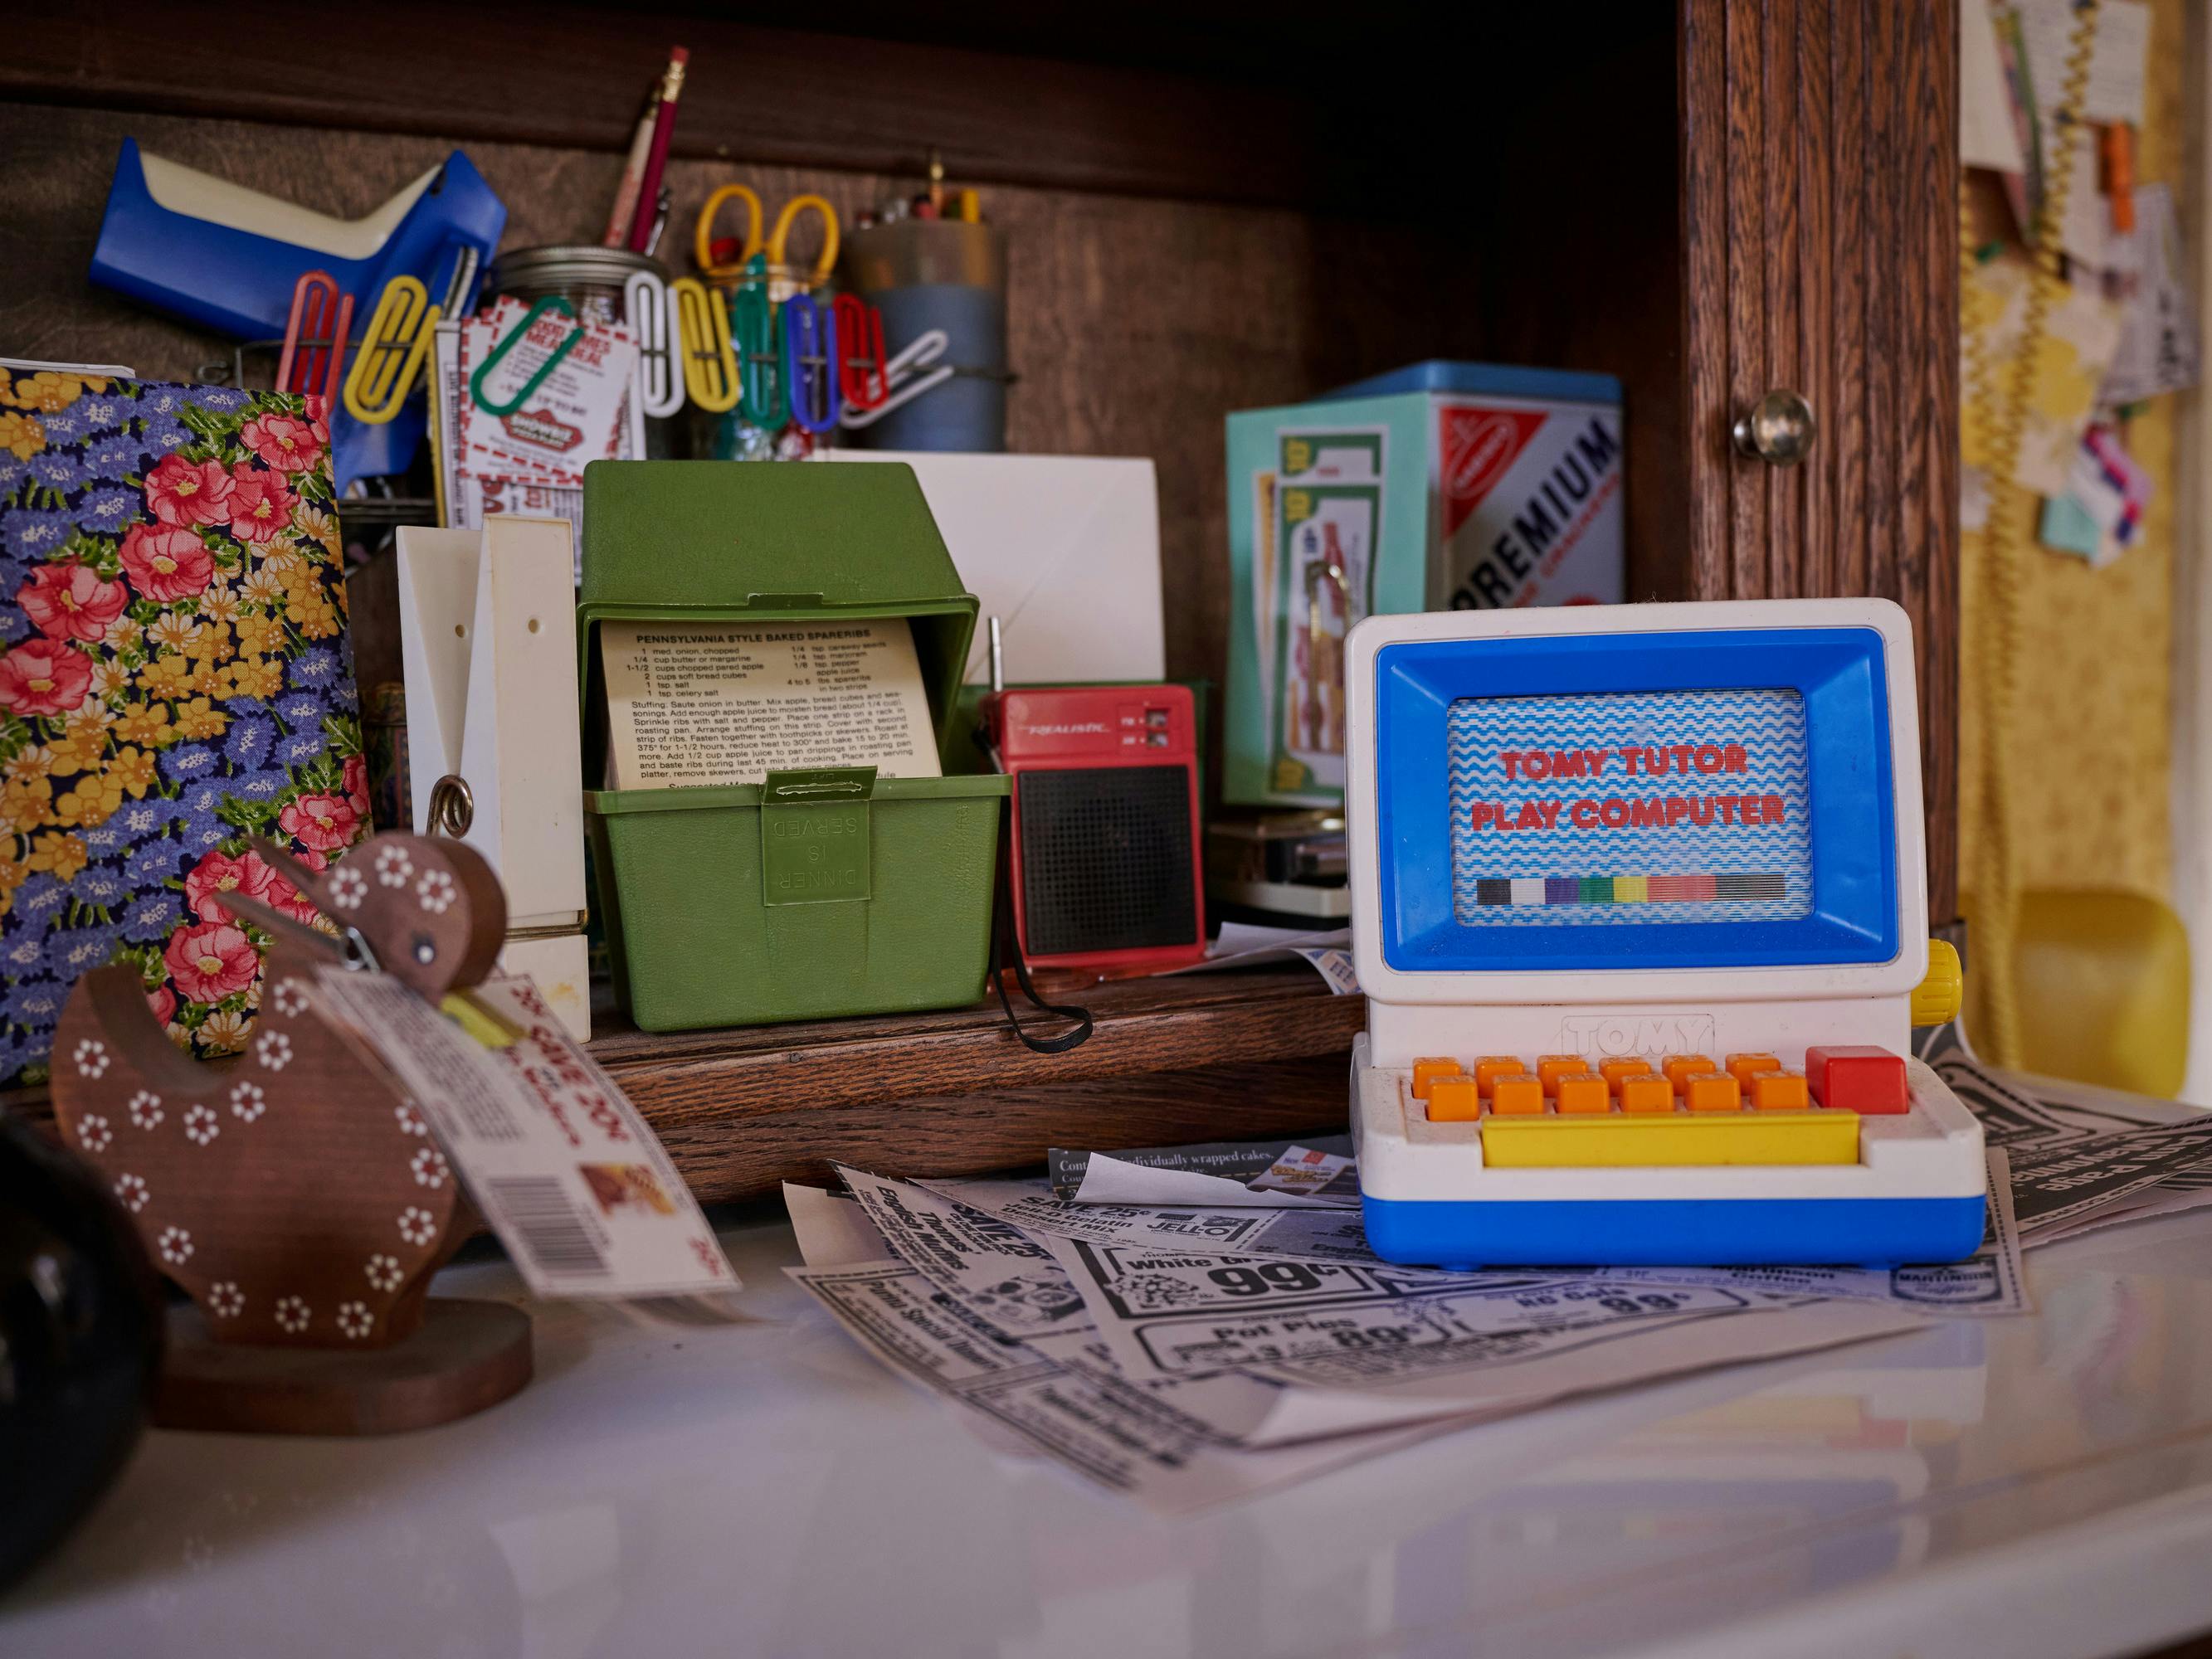 A view of the Gladney kitchen nook, bursting at the seams with recipe cards, coupons, miscellaneous office supplies and a toy computer.